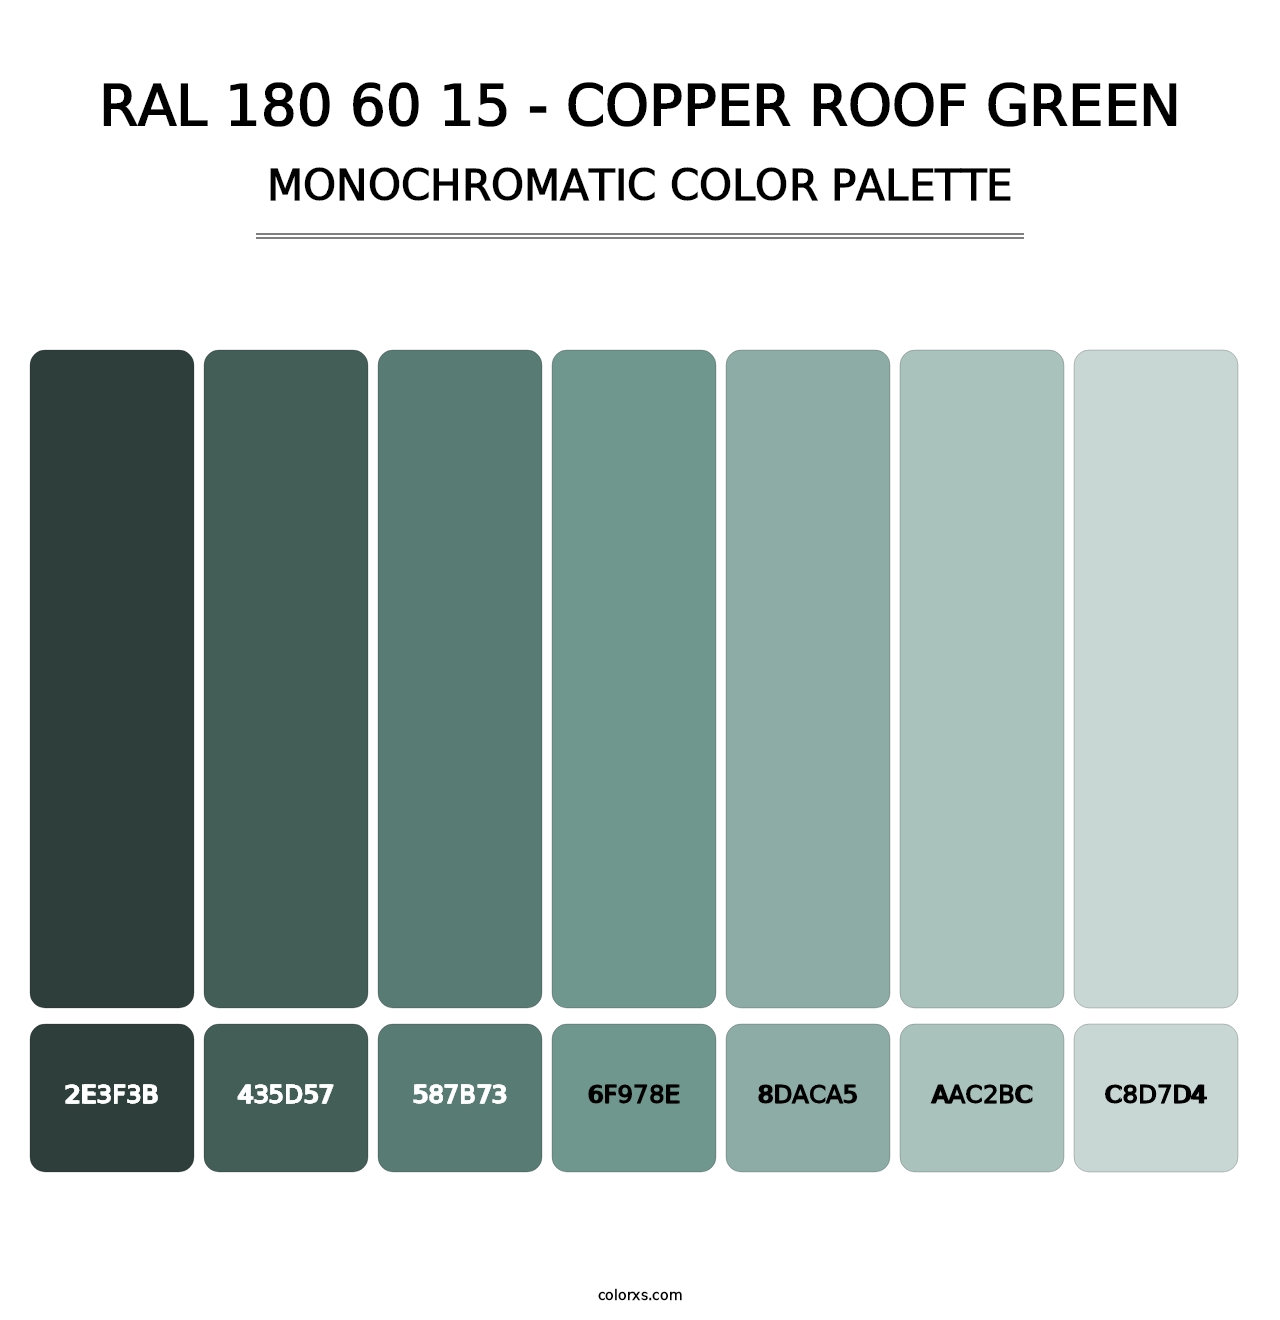 RAL 180 60 15 - Copper Roof Green - Monochromatic Color Palette